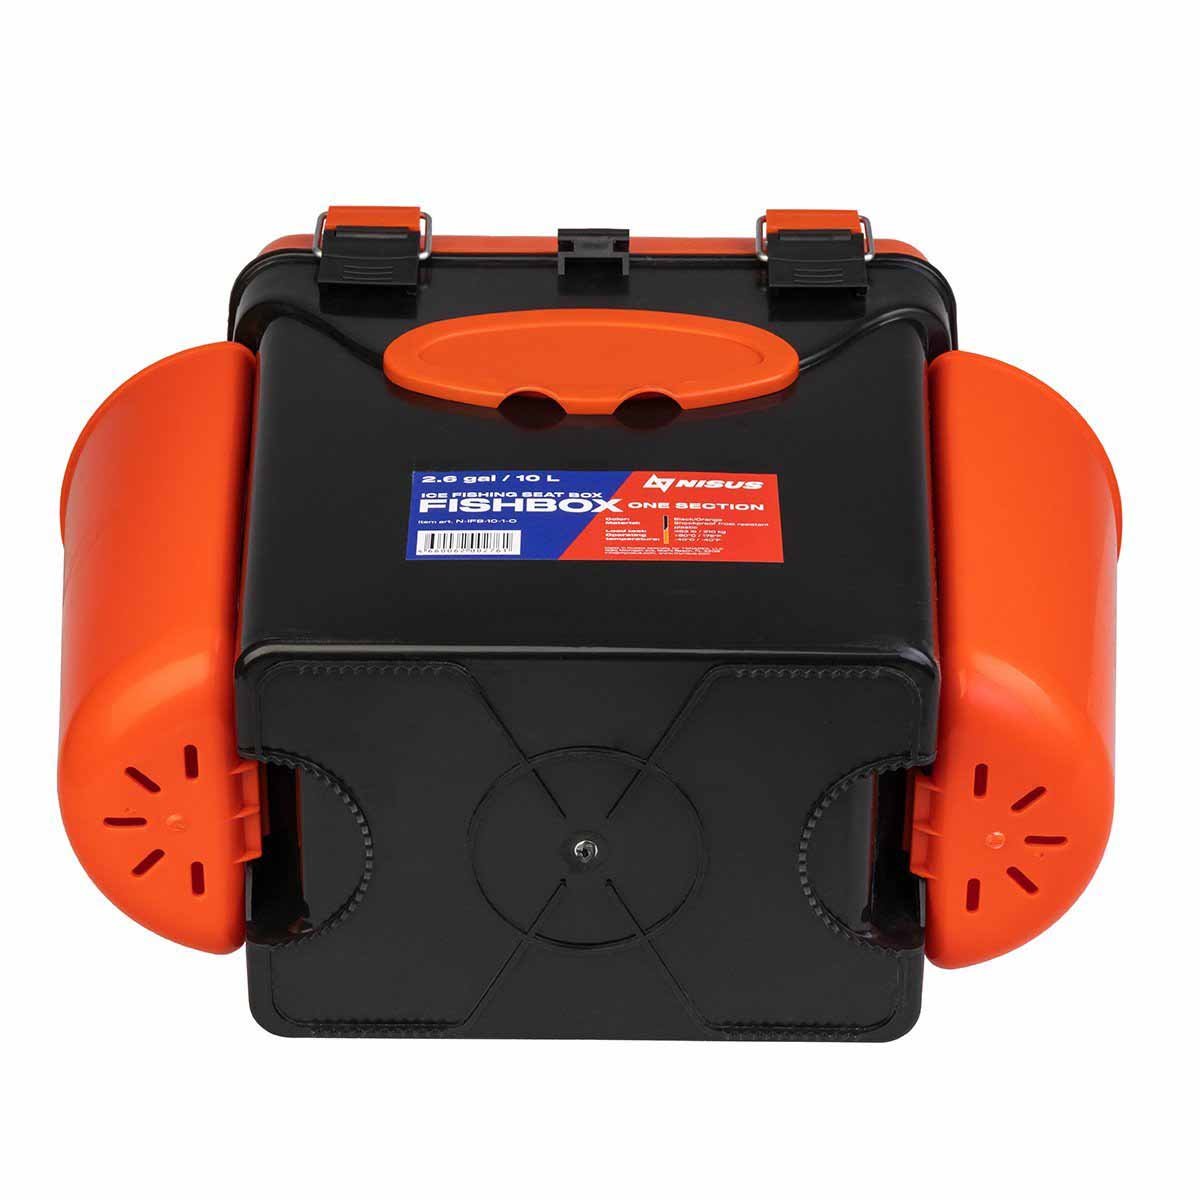 FishBox 10 liter SeatBox for Ice Fishing Tackle and Gear, orange, bottom view